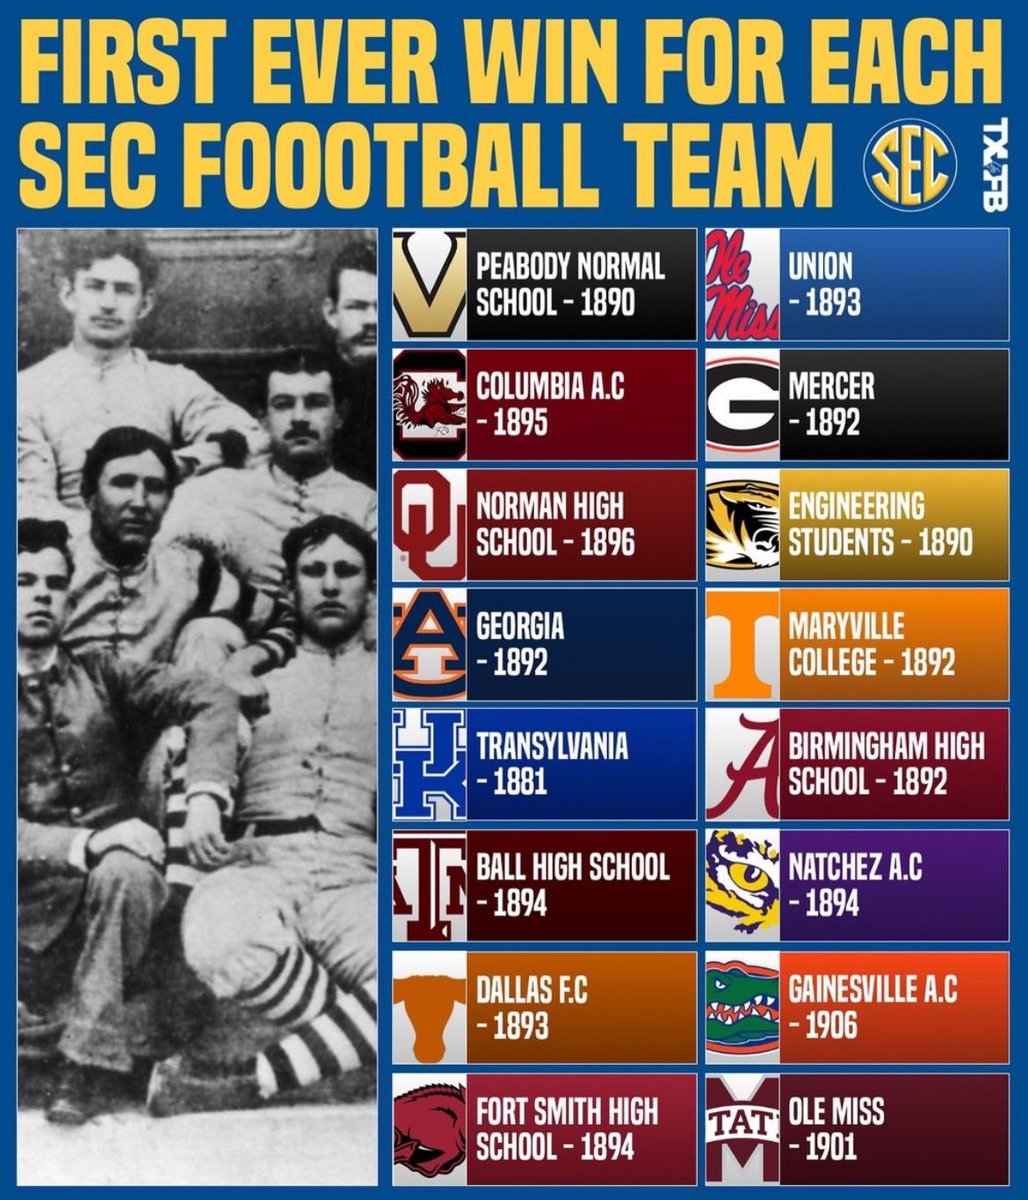 The first EVER win for each #SEC football team. Which results stand out most? (graphic via @txfblife)